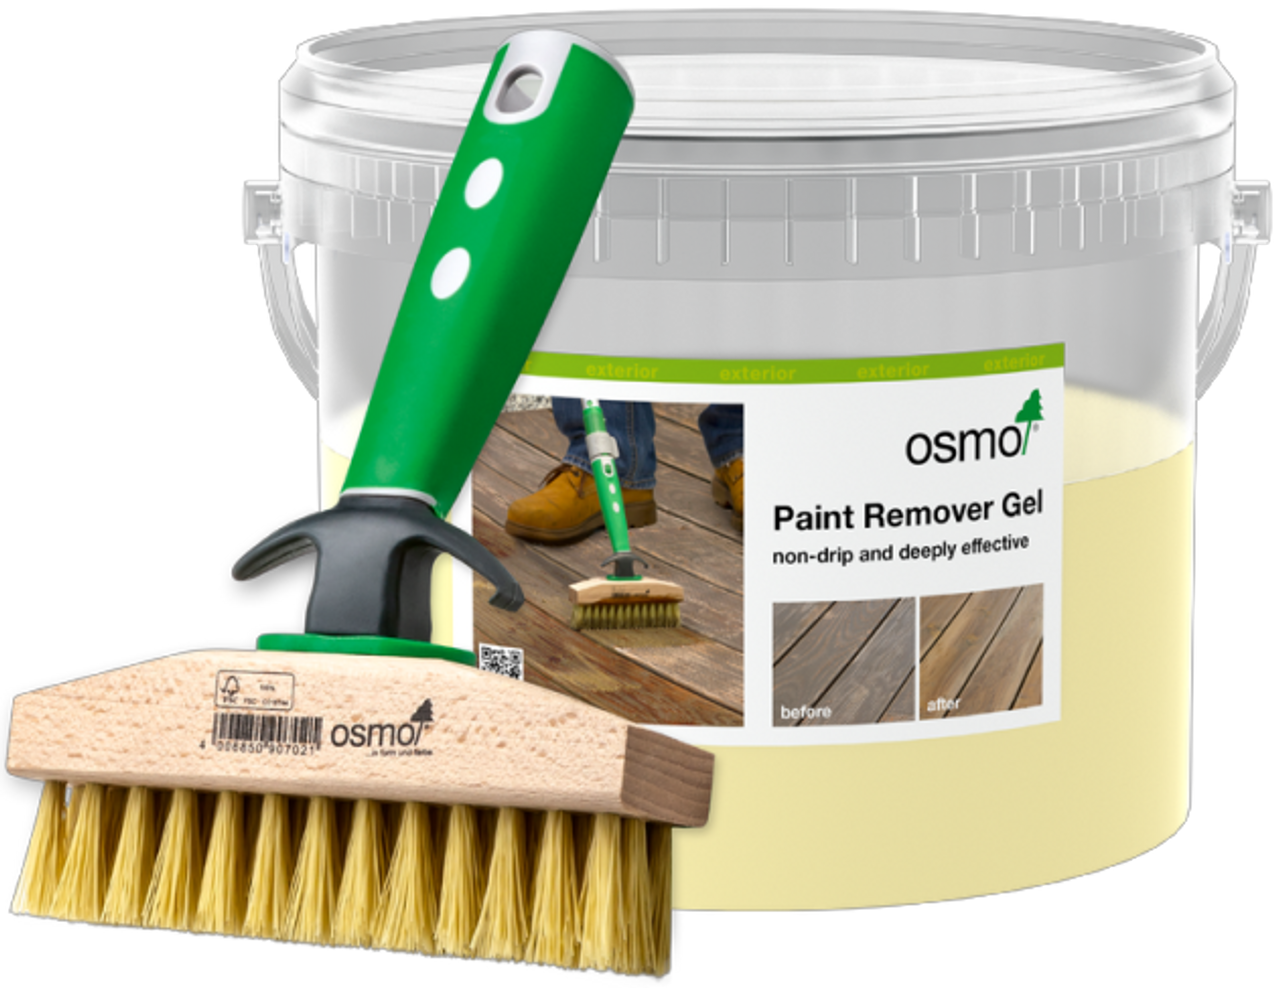 OSMO Paint Remover Gel | 6611 Painter Remover Gel with Cleaning Brush